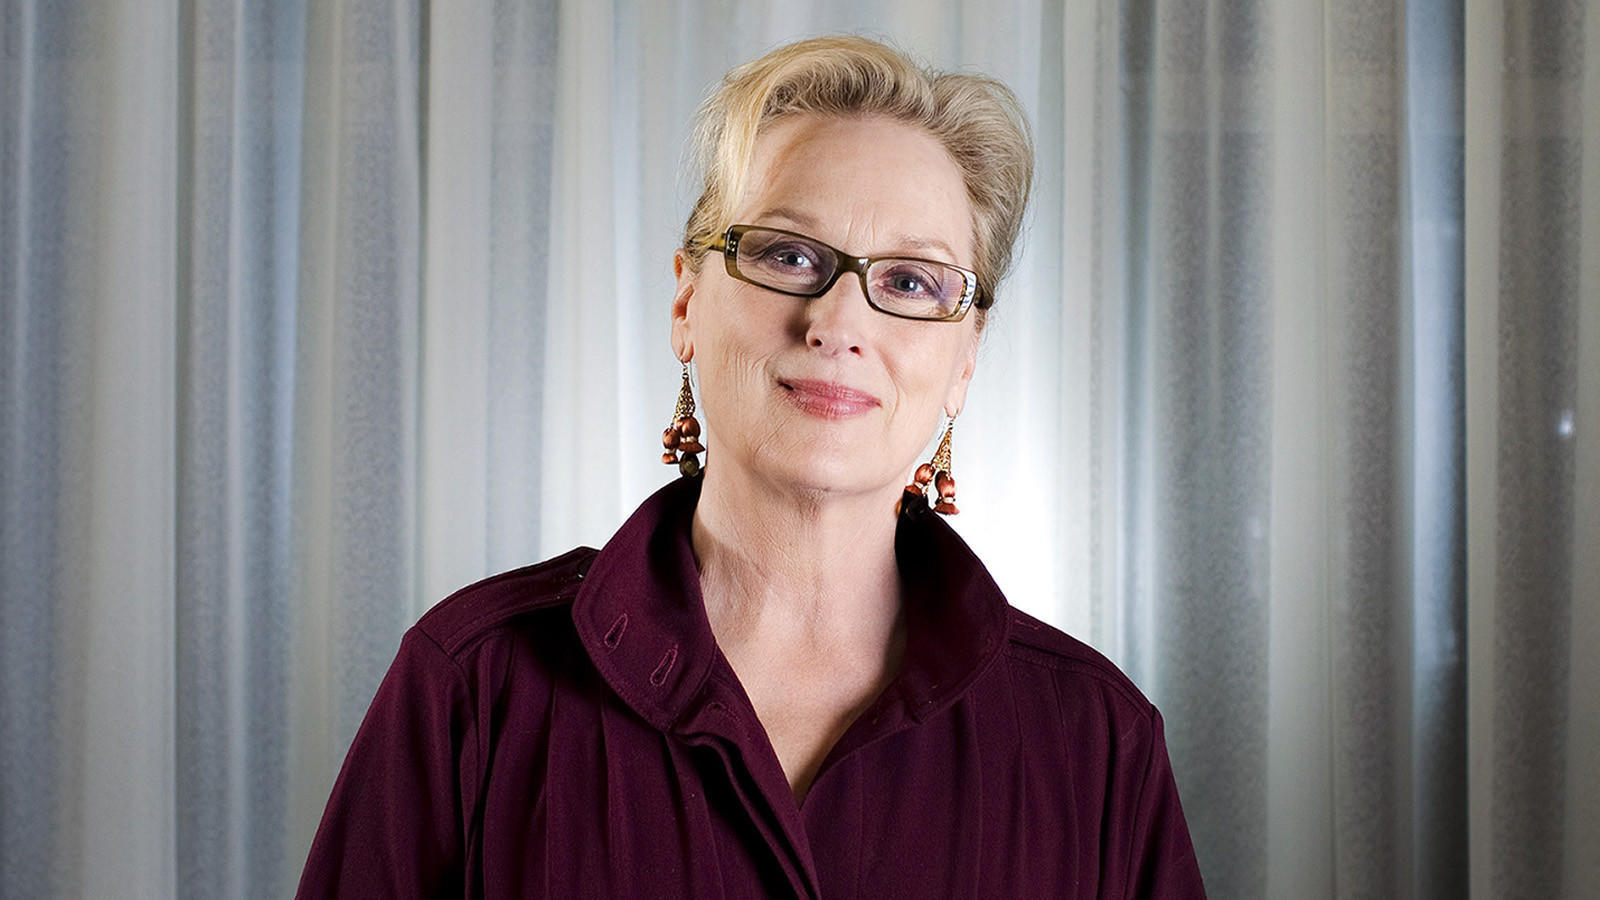 A Star Is Born: Meryl Streep turns 68 today - Los Angeles Times